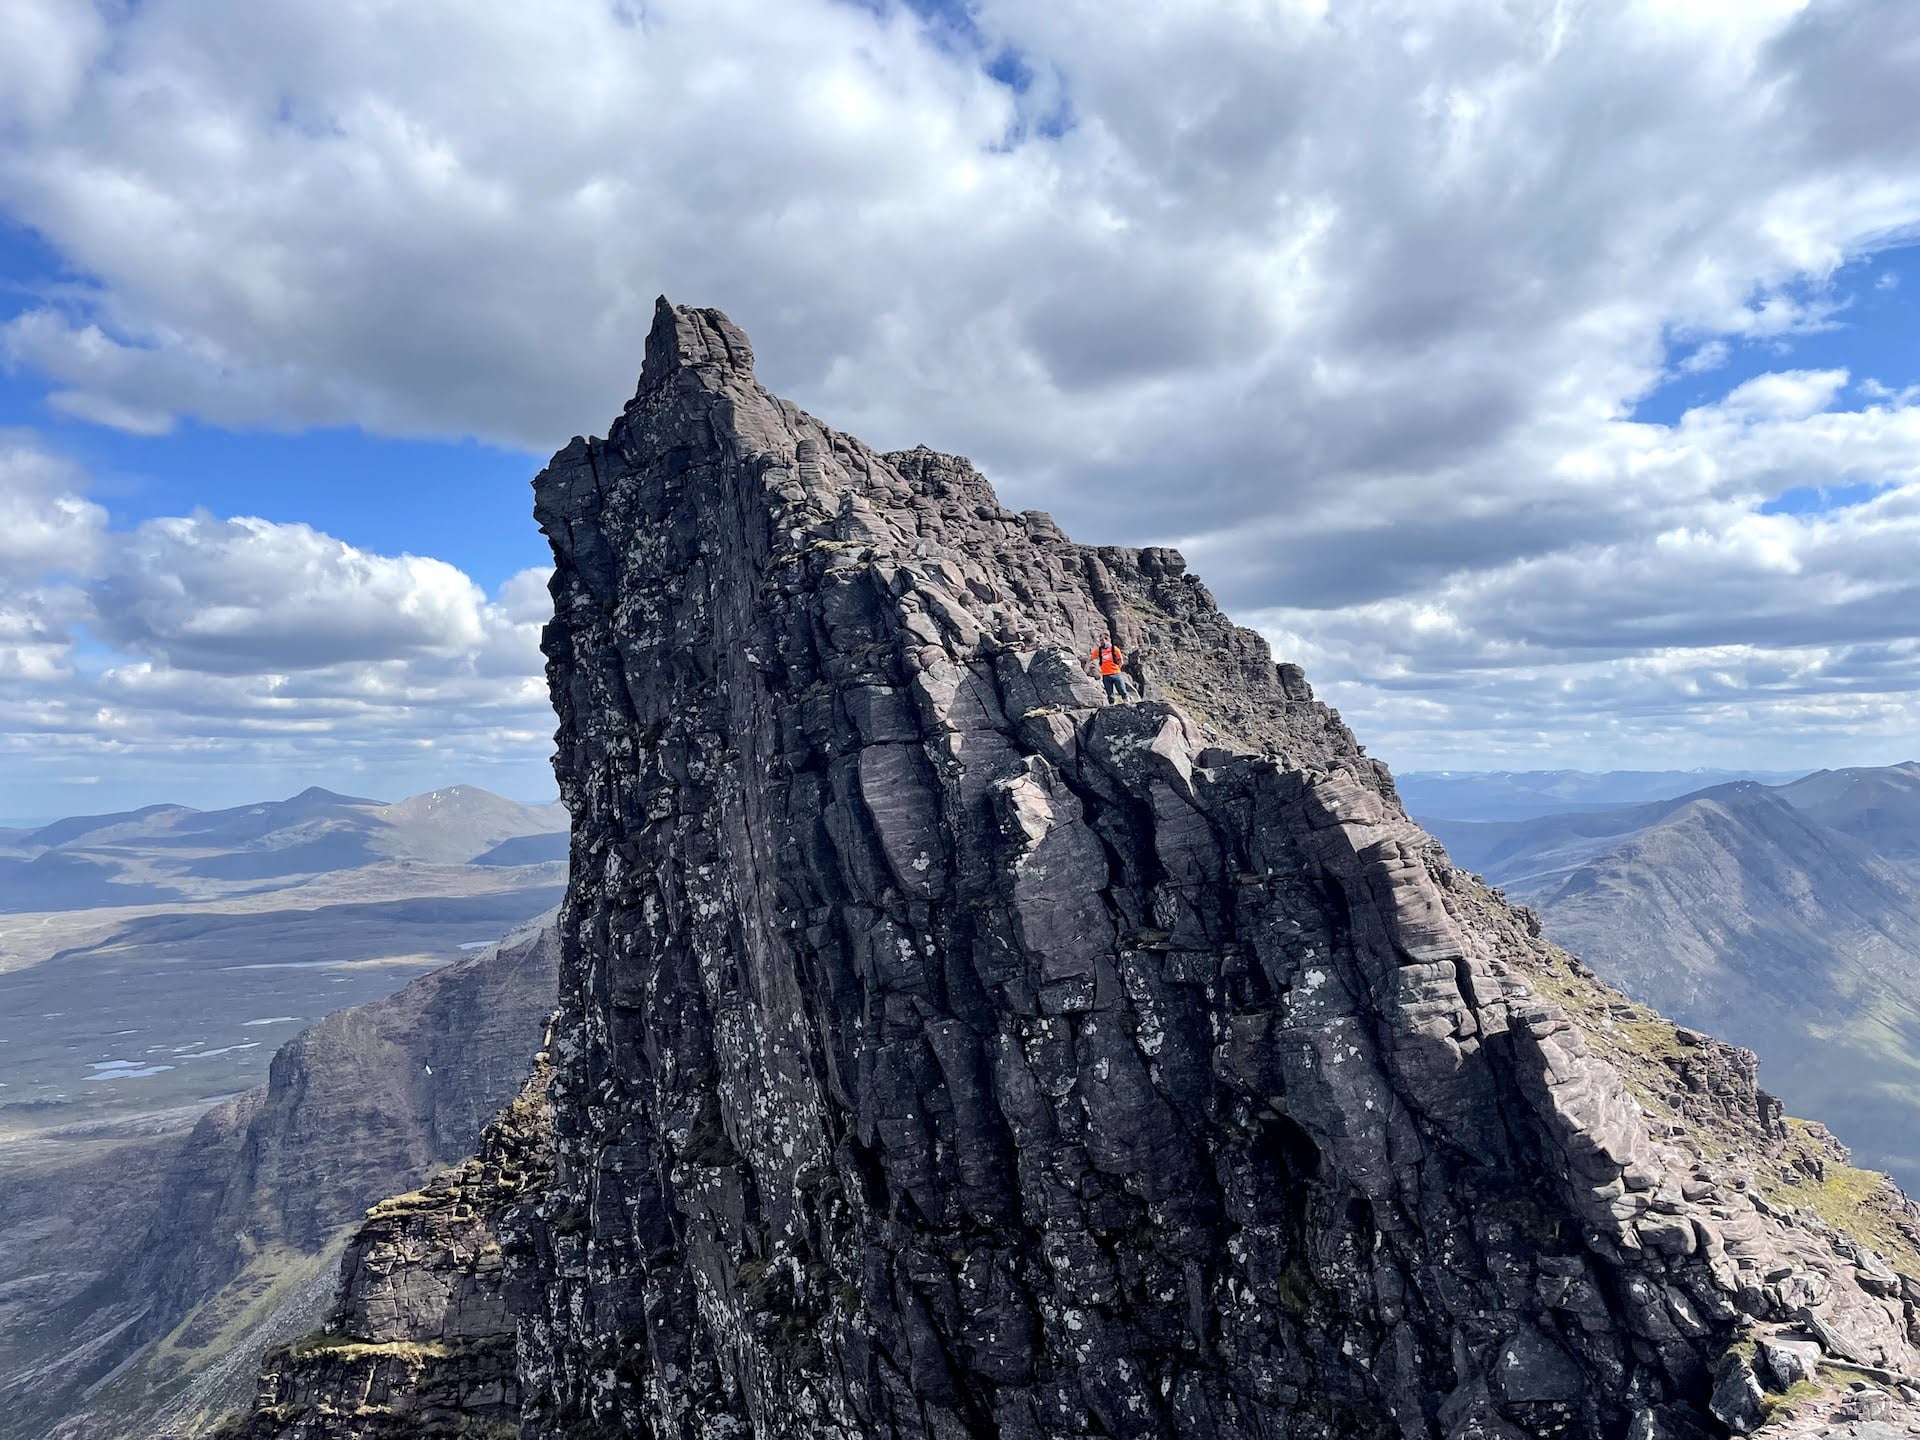 Looking back from An Teallach